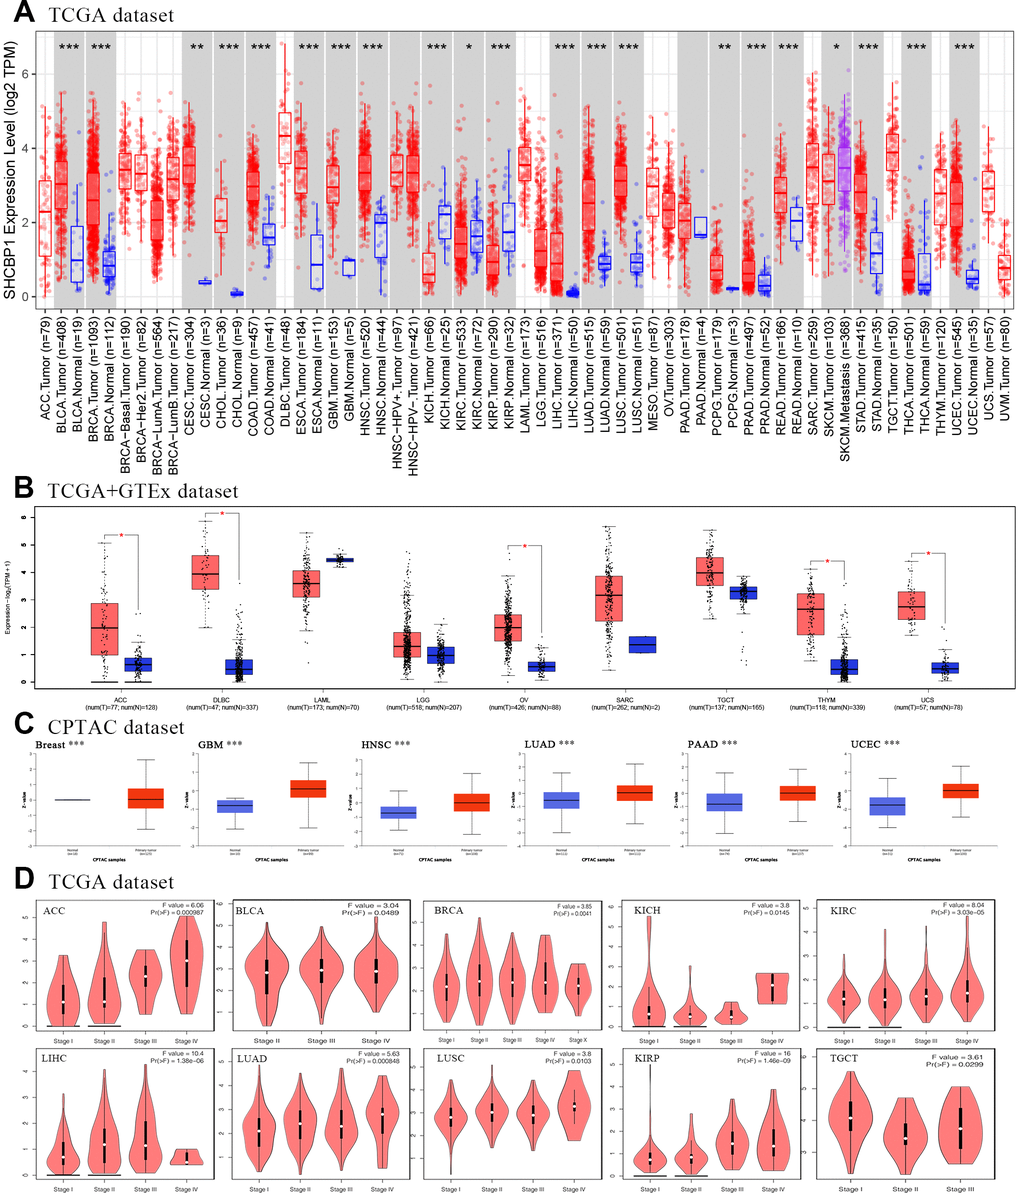 Expression of SHCBP1 and its association with pathological stages. (A) The expression of SHCBP1 was analyzed by using TIMER2 in TCGA dataset. (B) SHCBP1 expression in ACC, DLBC, LAML, LGG, OV, SARC, TGCT, THYM and UCS based on TCGA and GTEx dataset. (C) The expression of SHCBP1 protein in breast cancer, GBM, HNSC, LUAD, PAAD and UCEC based on UALCLAN database. (D) The association between SHCBP1 expression and pathological stages in certain cancers of GEPIA database. *PPP